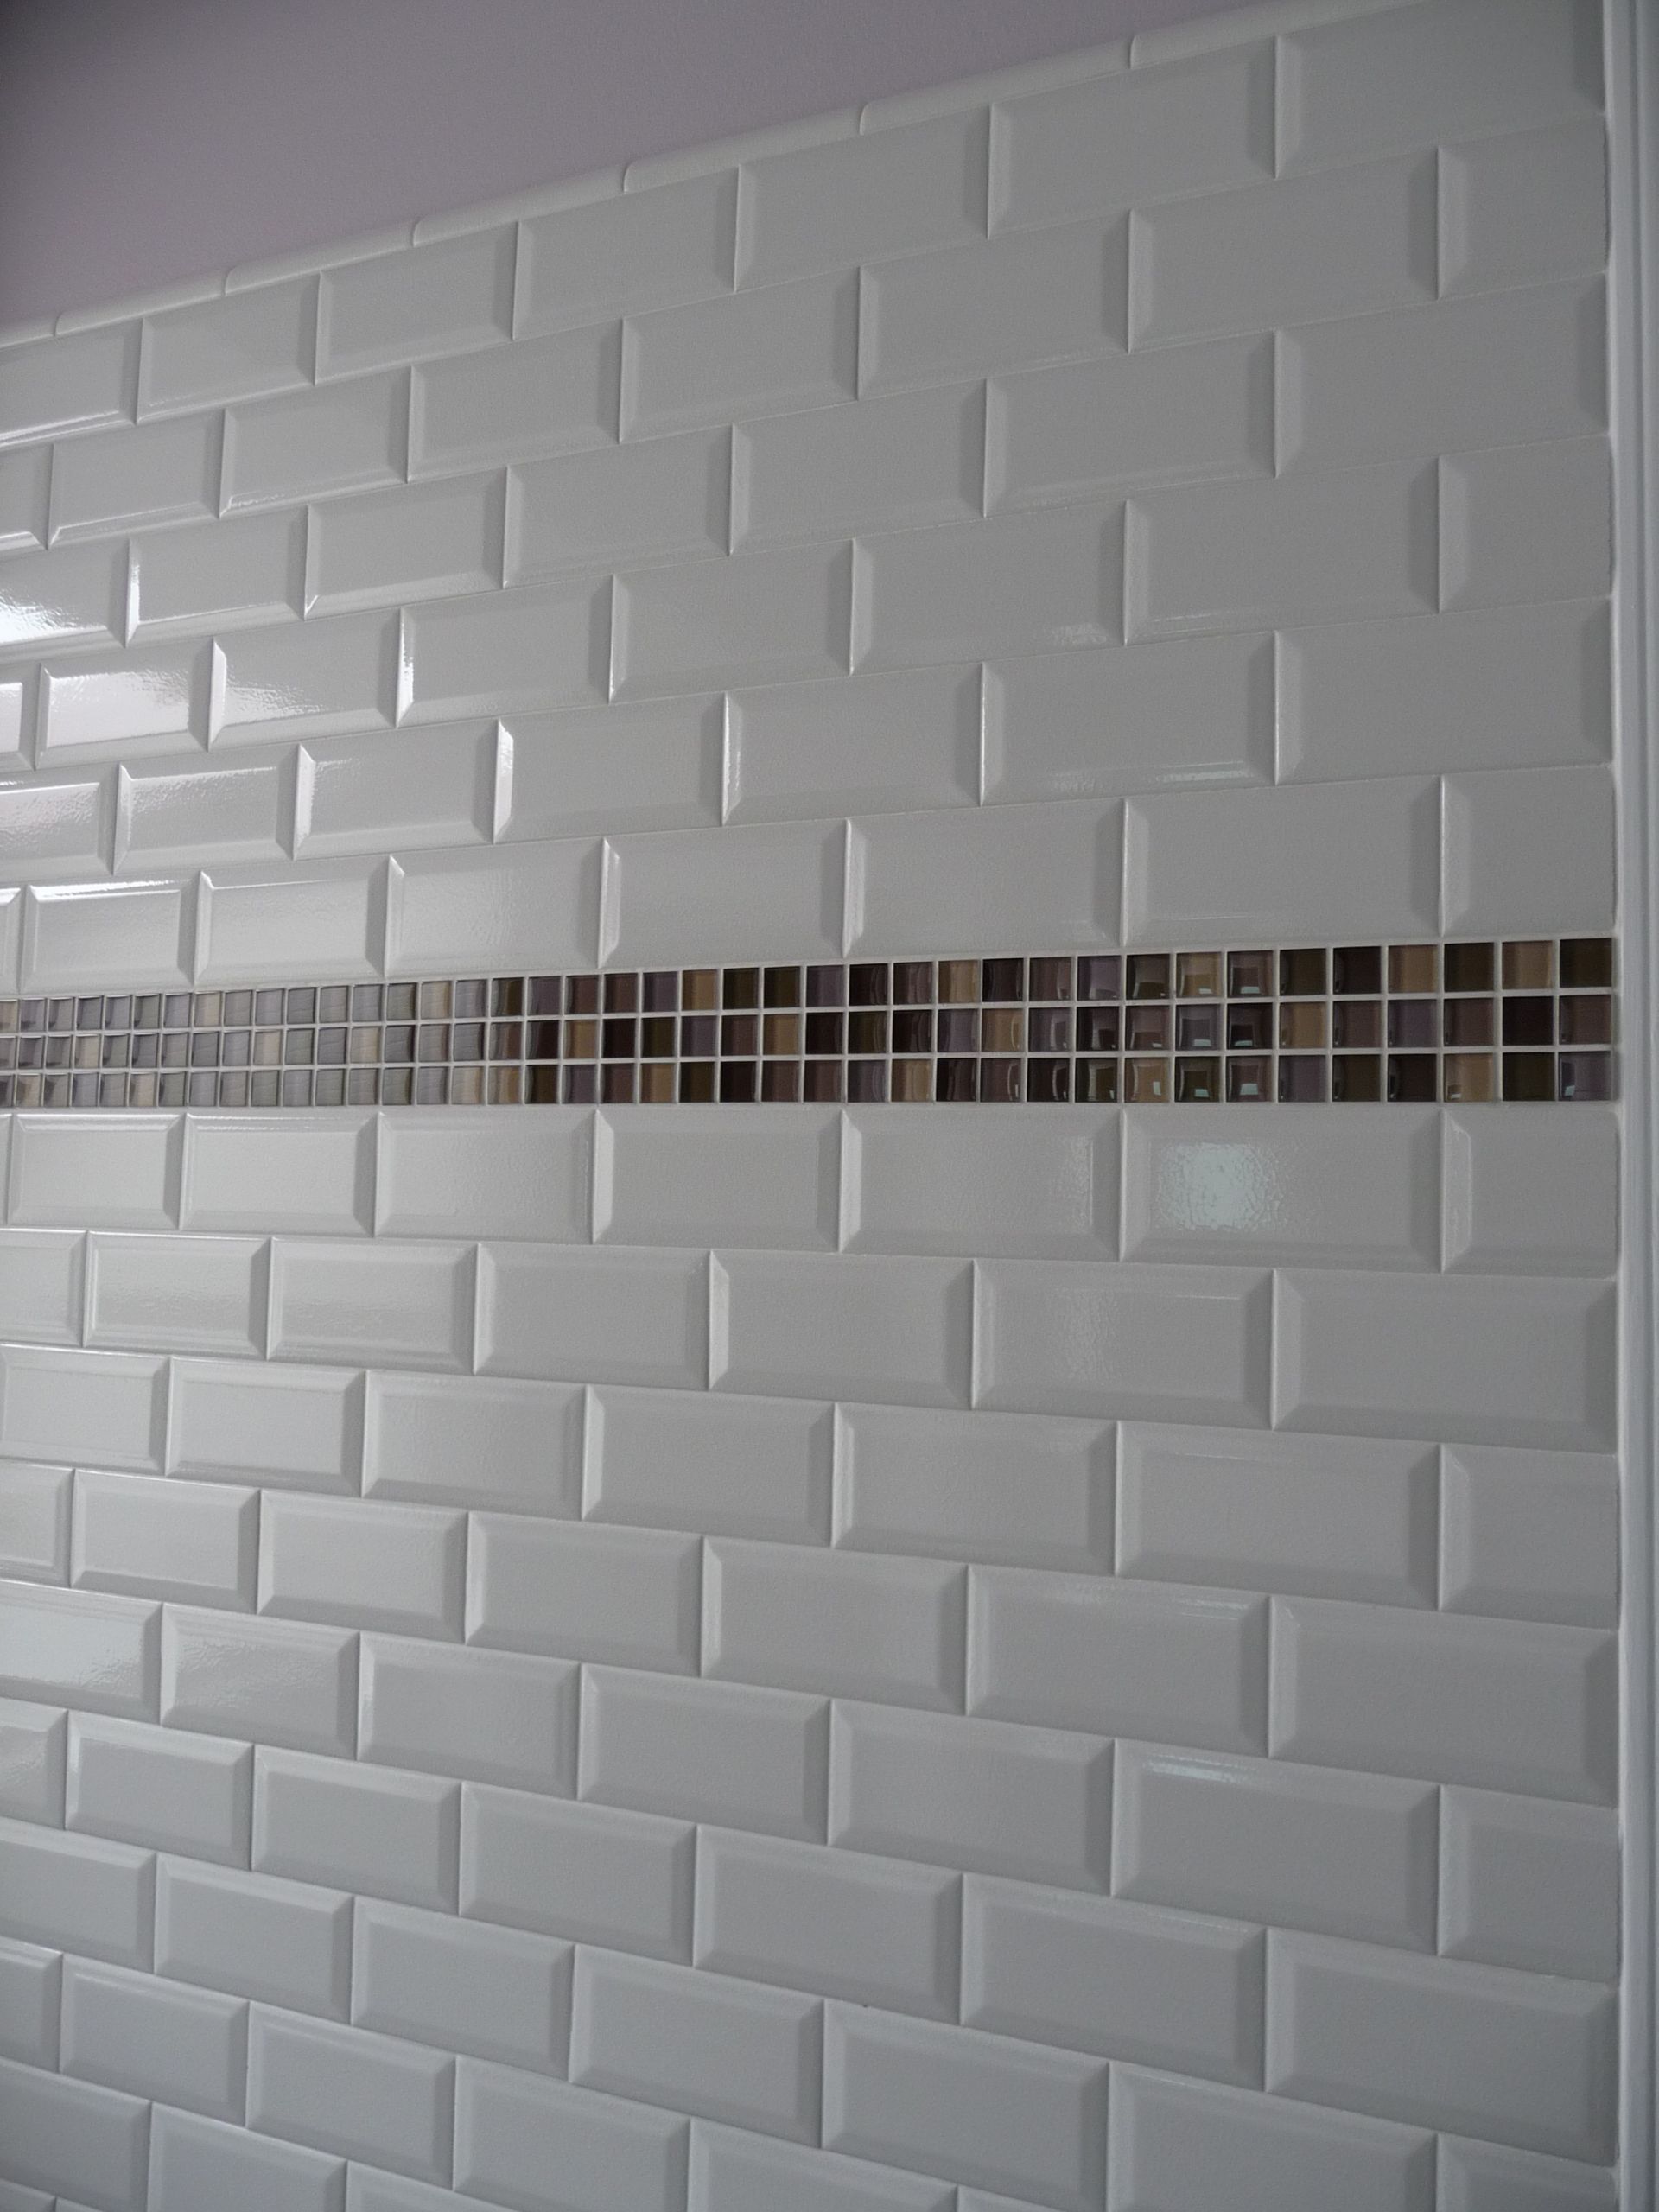 Tile Sizes For Bathrooms
 How to Choose the Best Subway Tile Sizes to Get the